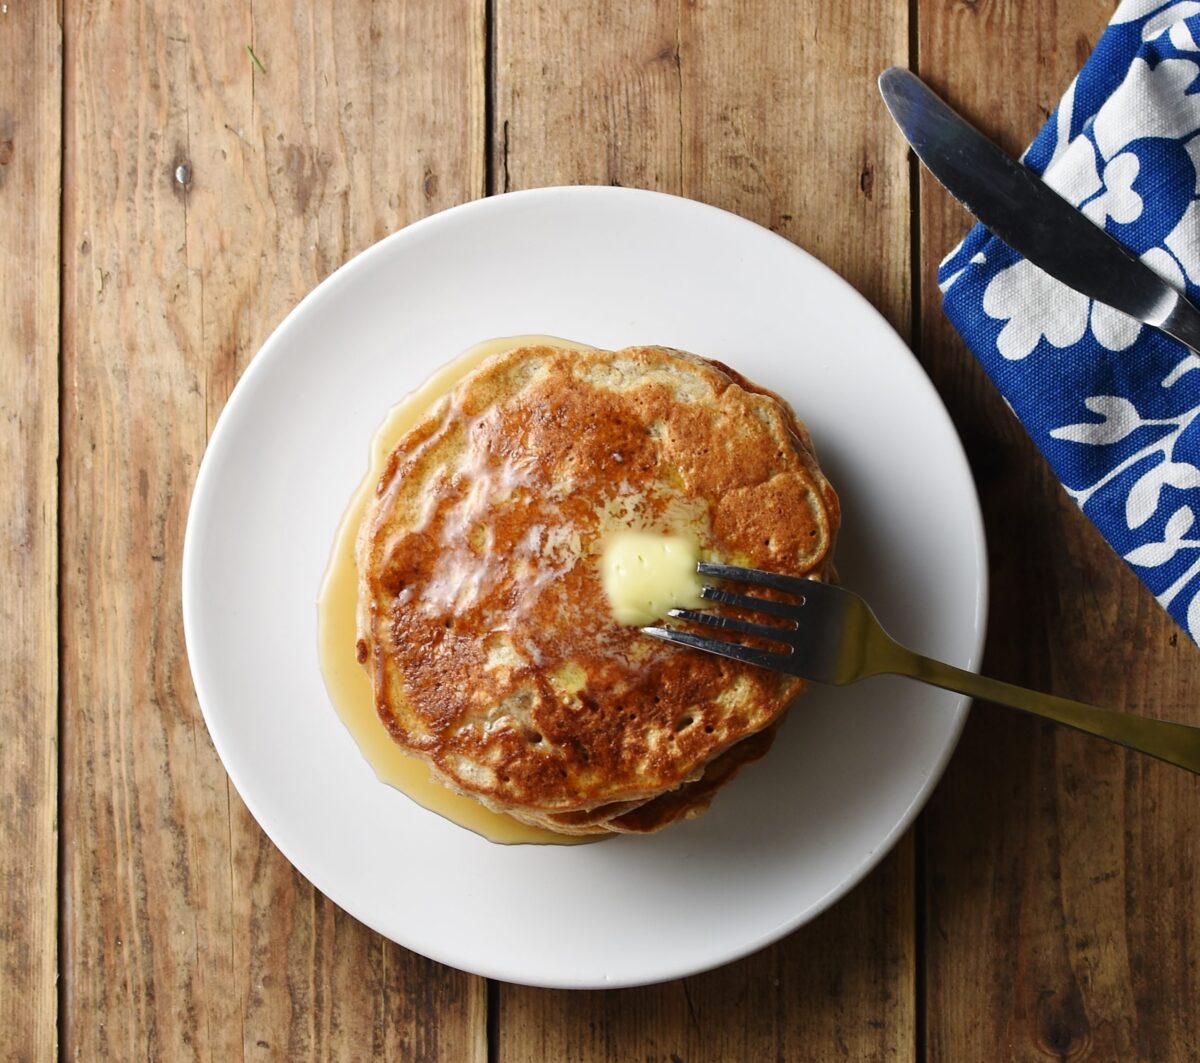 Top down view of pancakes with fork on white plate, and blue patterned cloth with knife in top right corner.